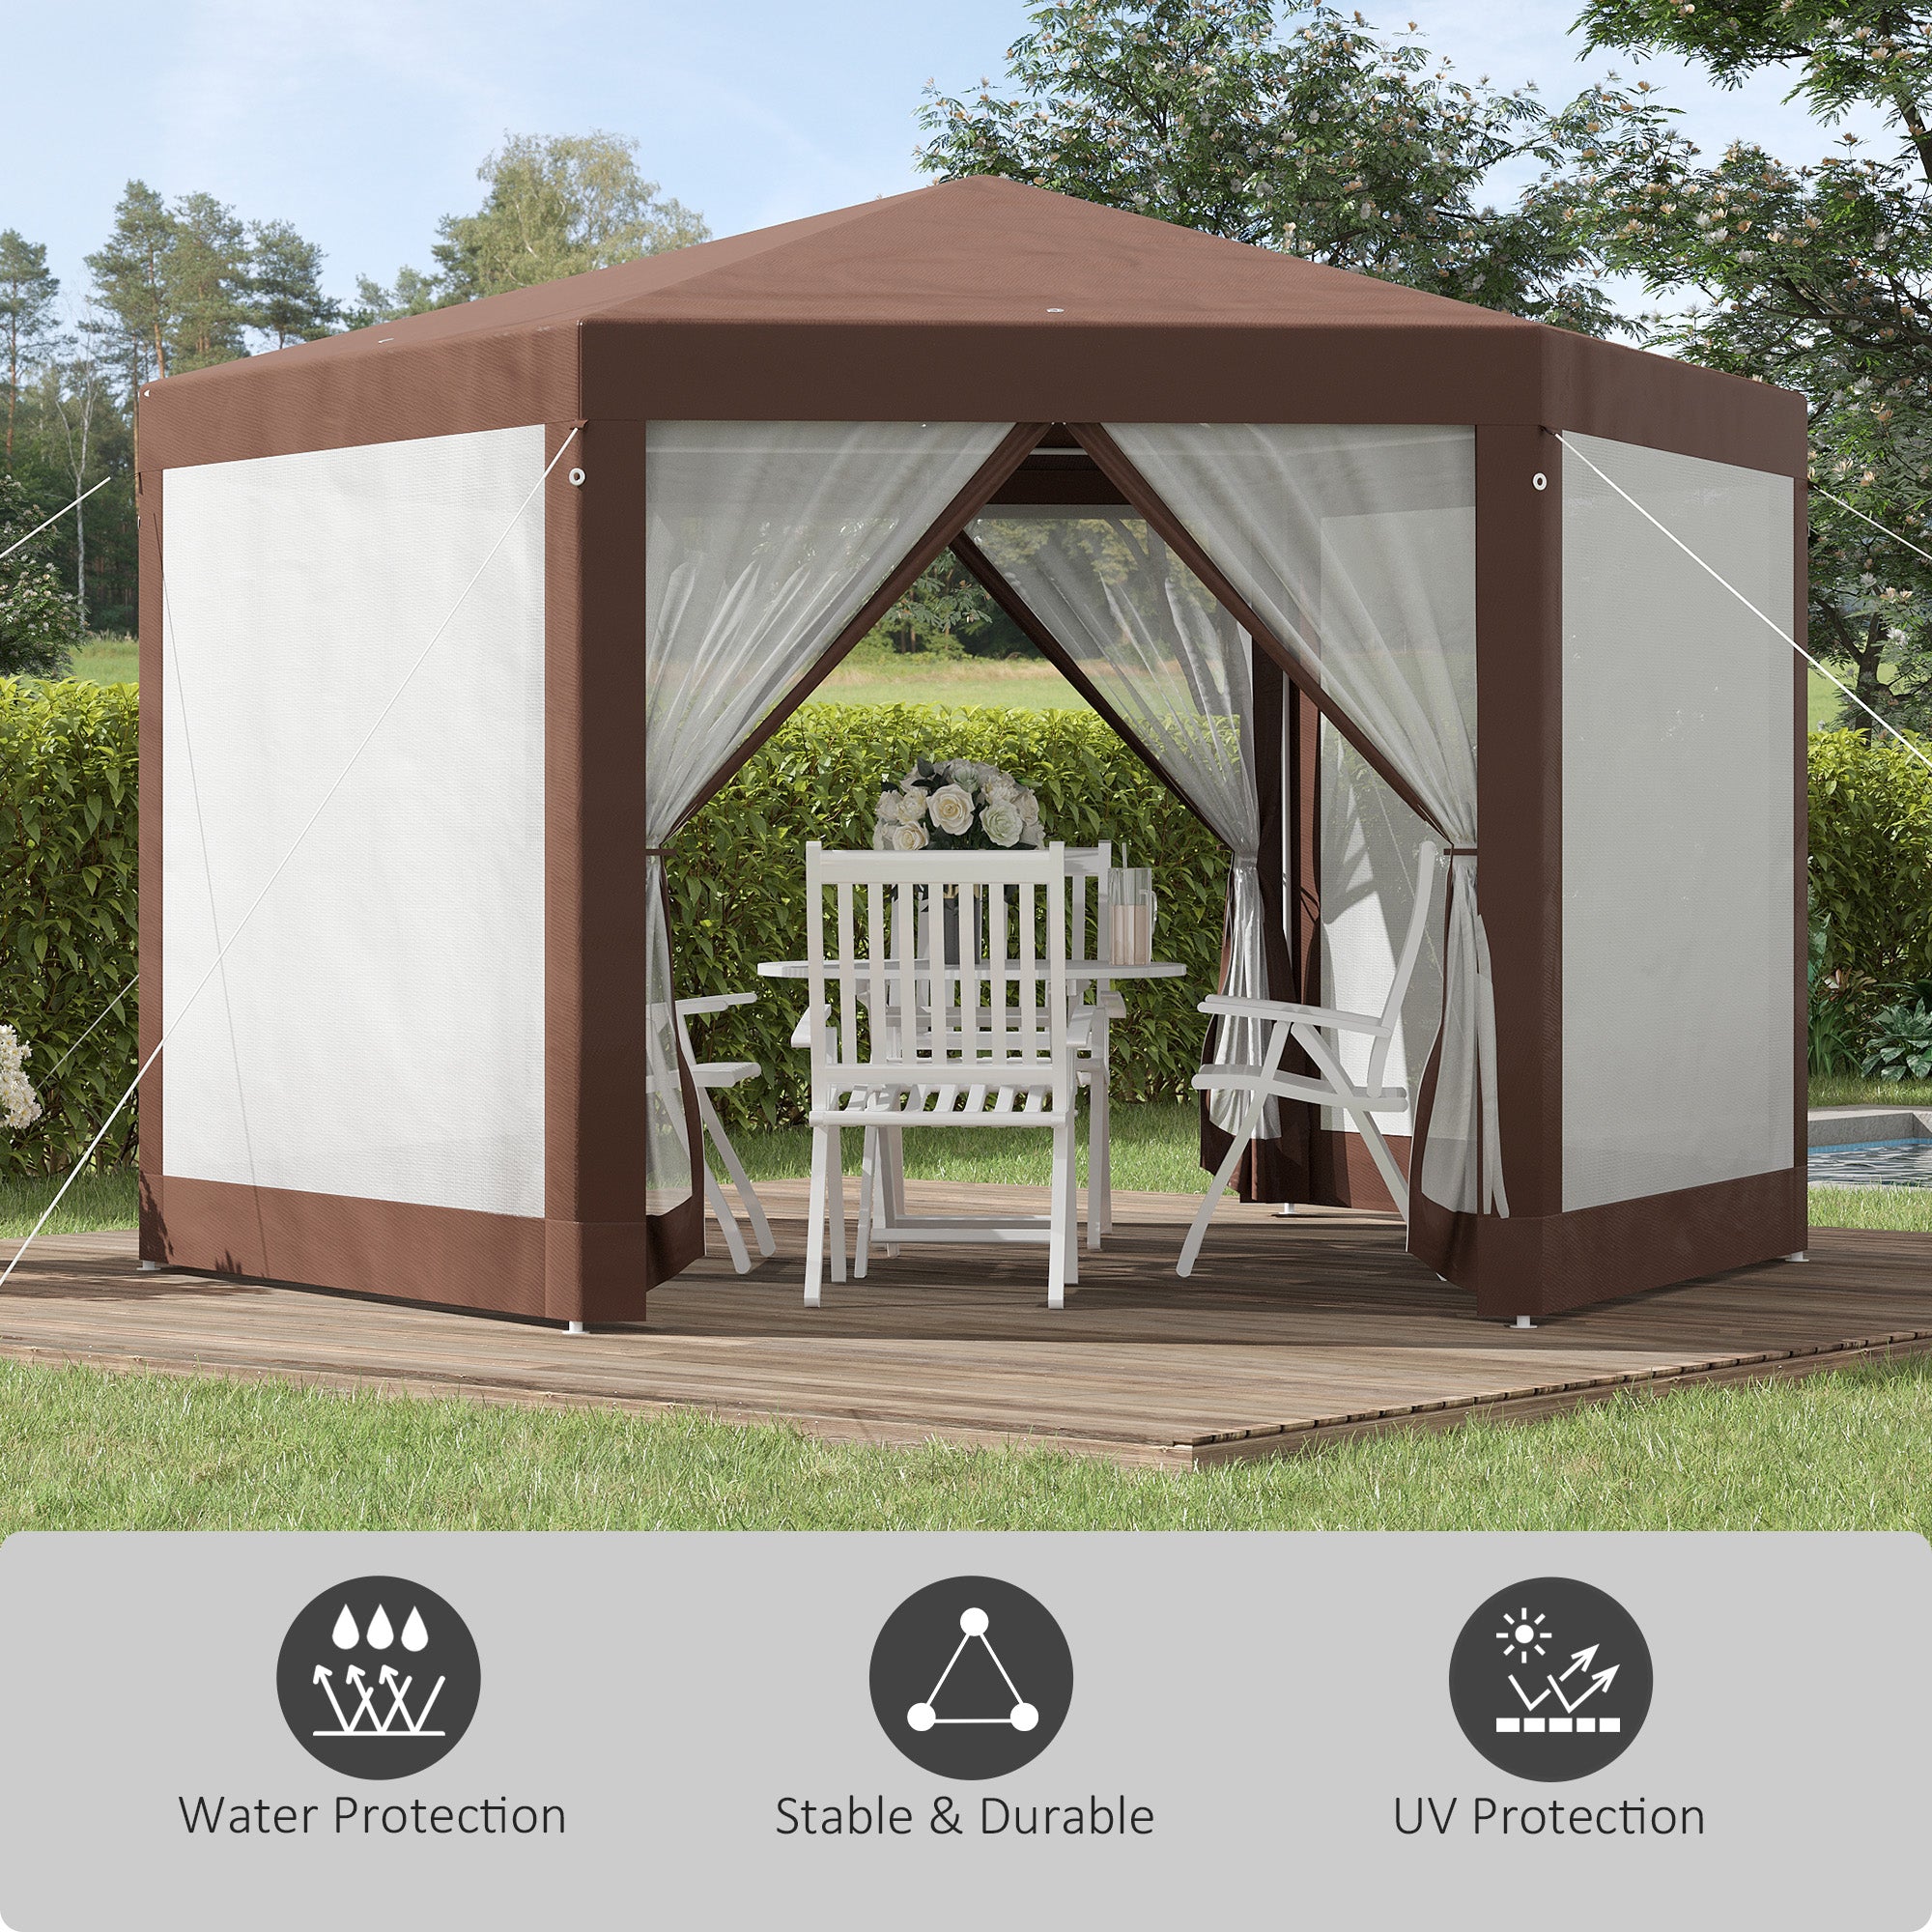 Outsunny Hexagonal Garden Gazebo Patio Party Outdoor Canopy Tent Sun Shelter with Mosquito Netting and Zipped Door, Brown